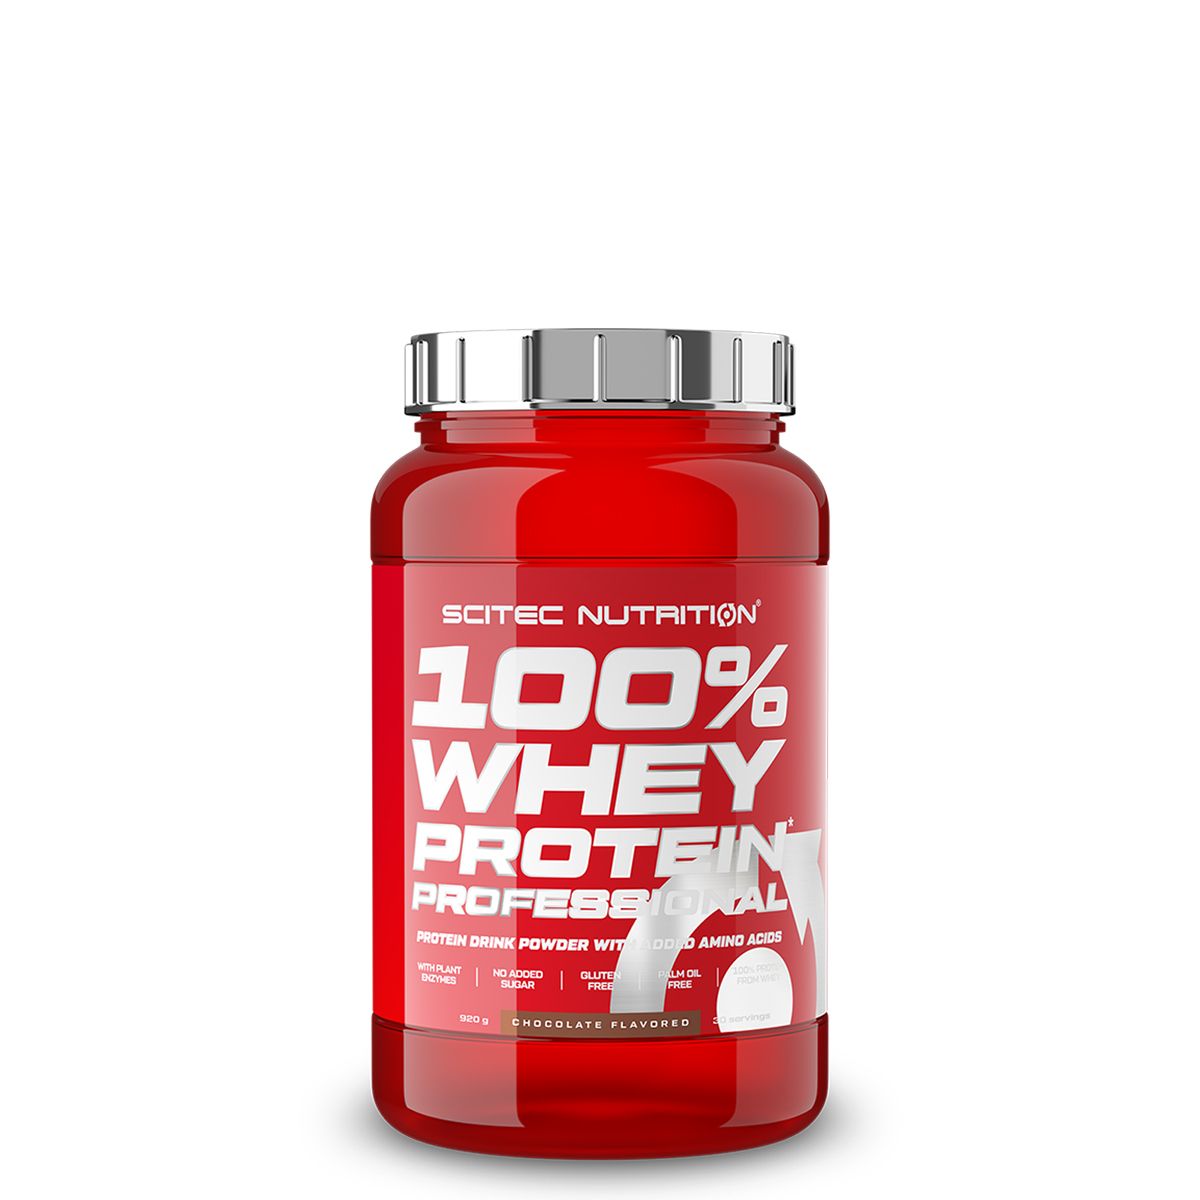 SCITEC NUTRITION - 100% WHEY PROTEIN PROFESSIONAL - 920 G (0,92 KG)